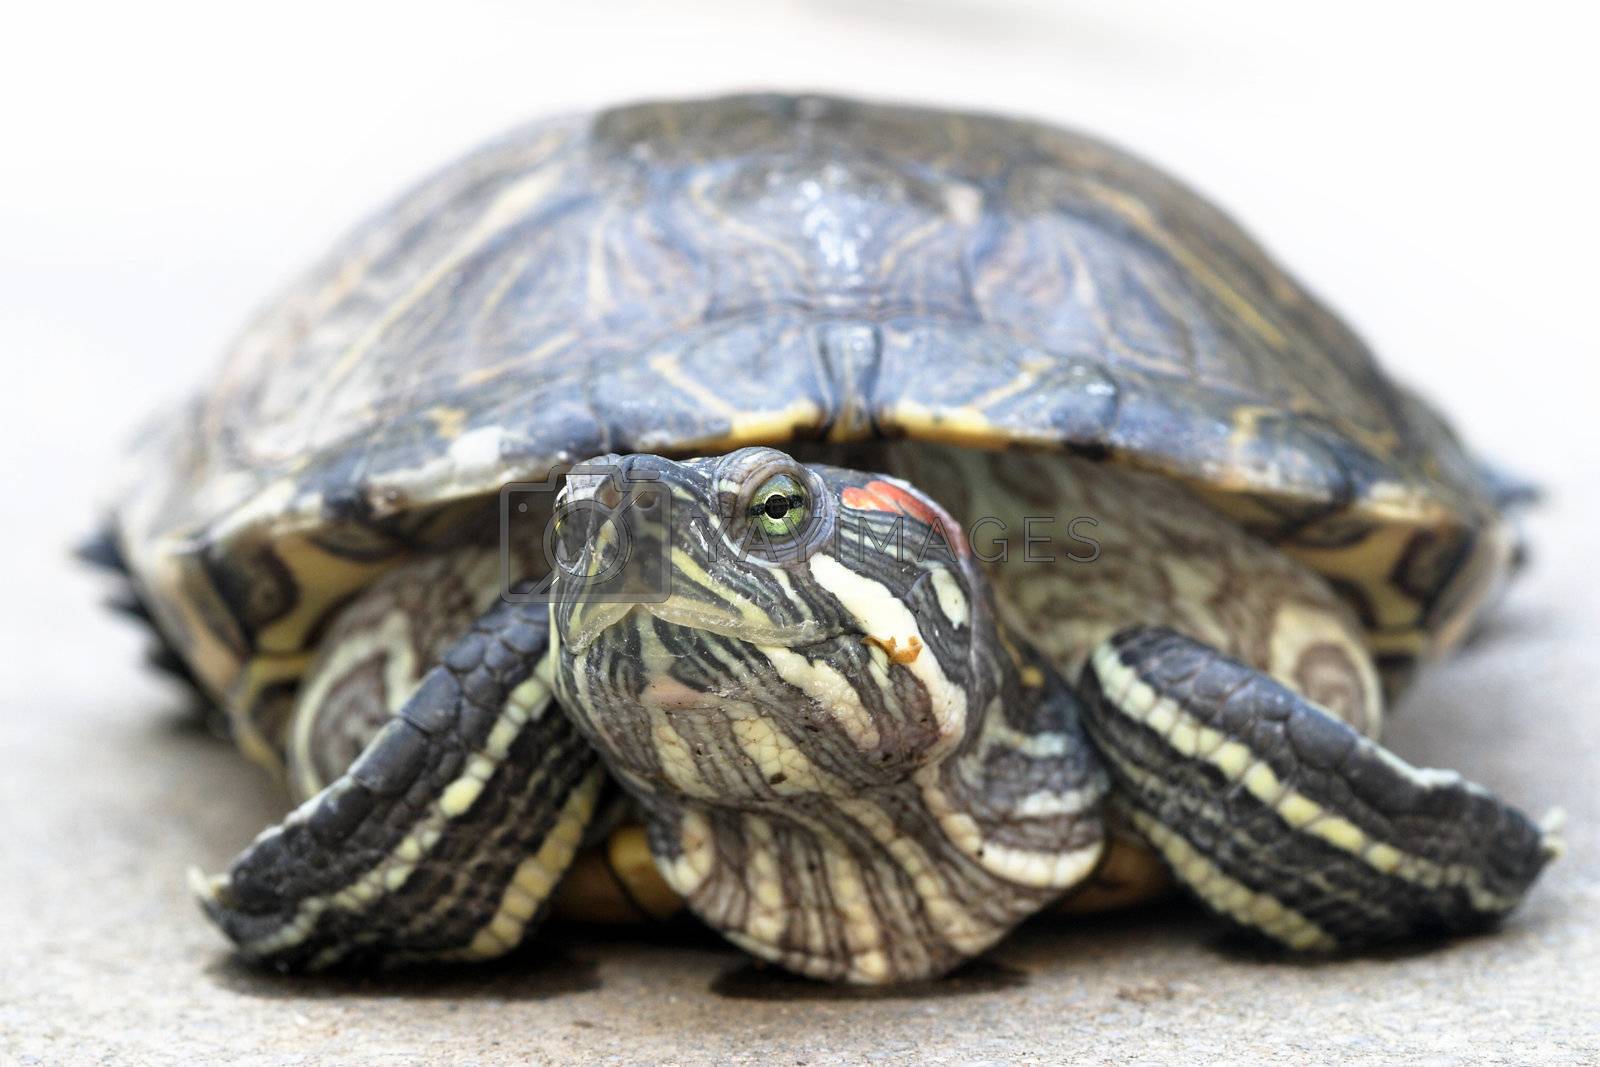 Royalty free image of Animal, turtle, reptile, by xps